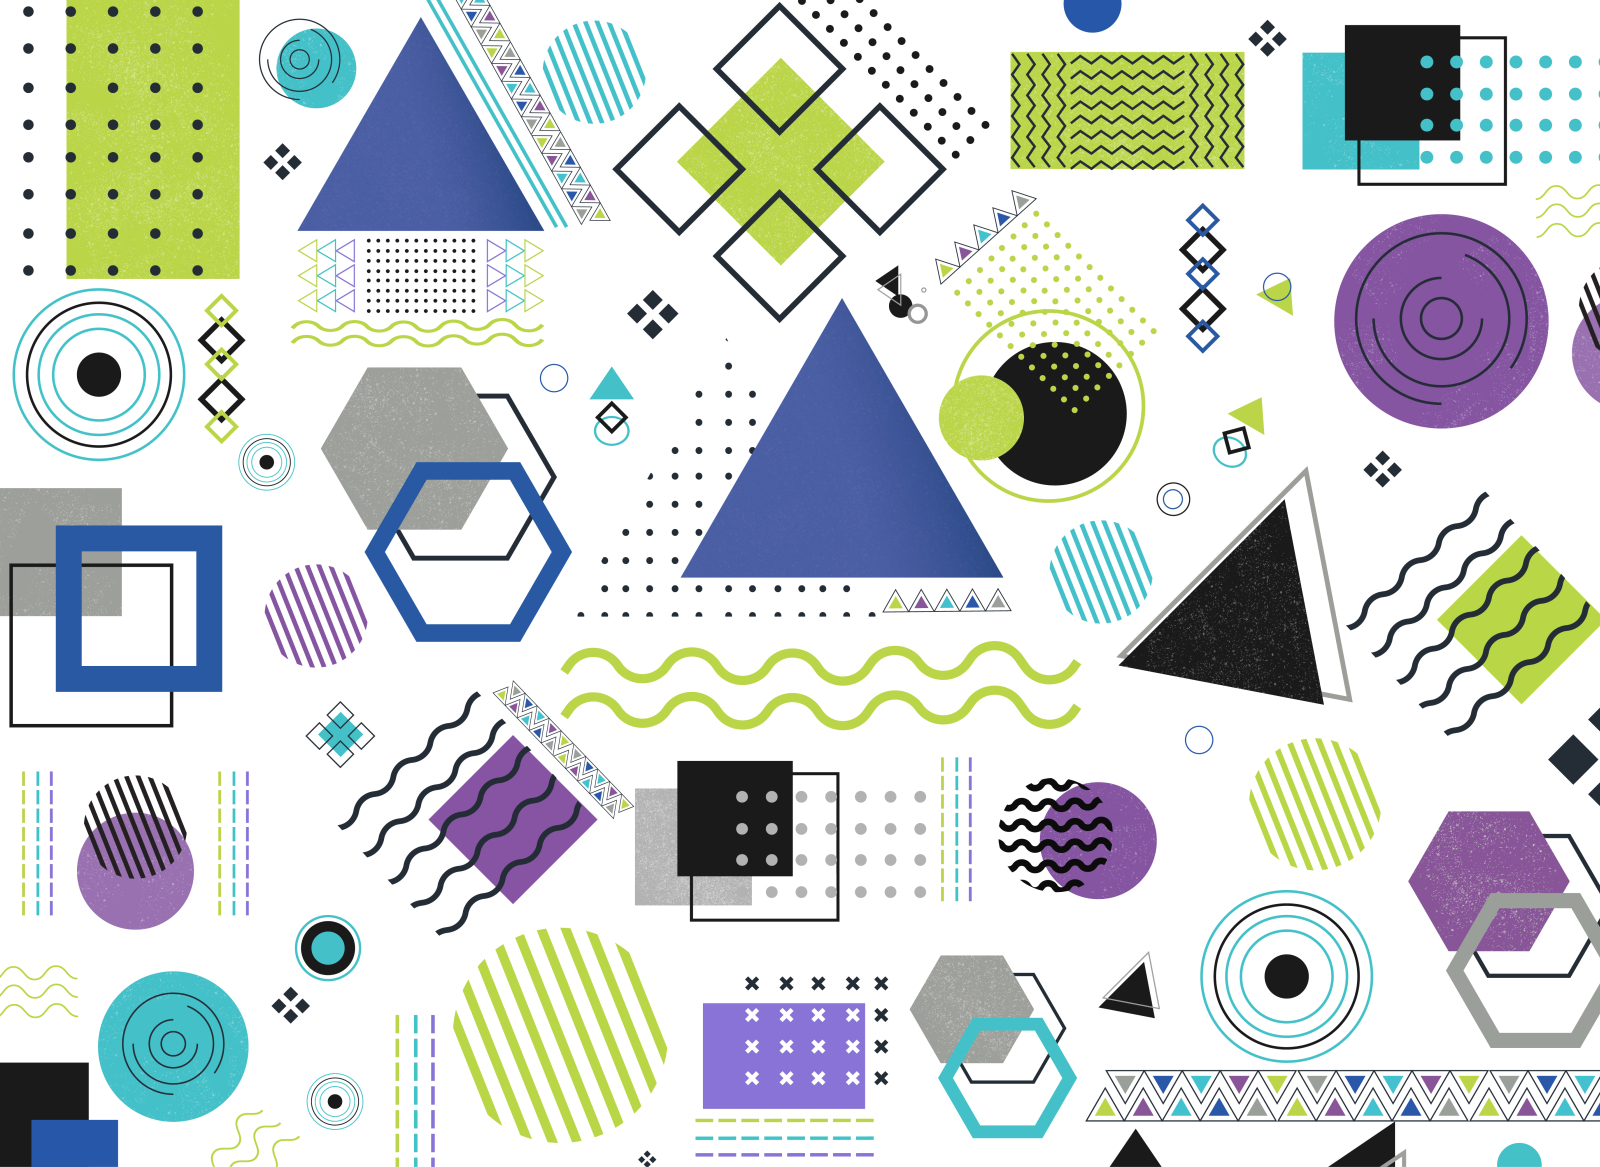 Grunge with Geometric shapes wallpaper by nazia on Dribbble